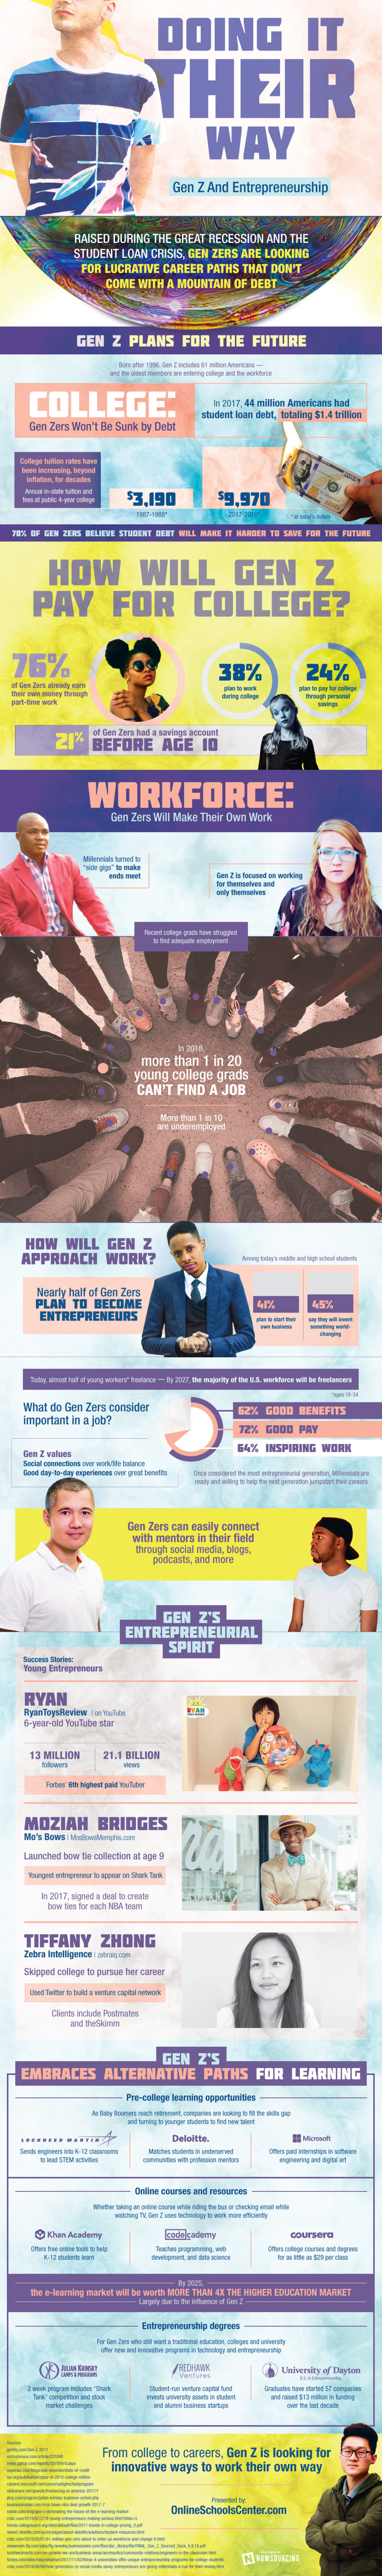 Nearly Half Of Gen Z-ers Want To Be Entrepreneurs Infographic